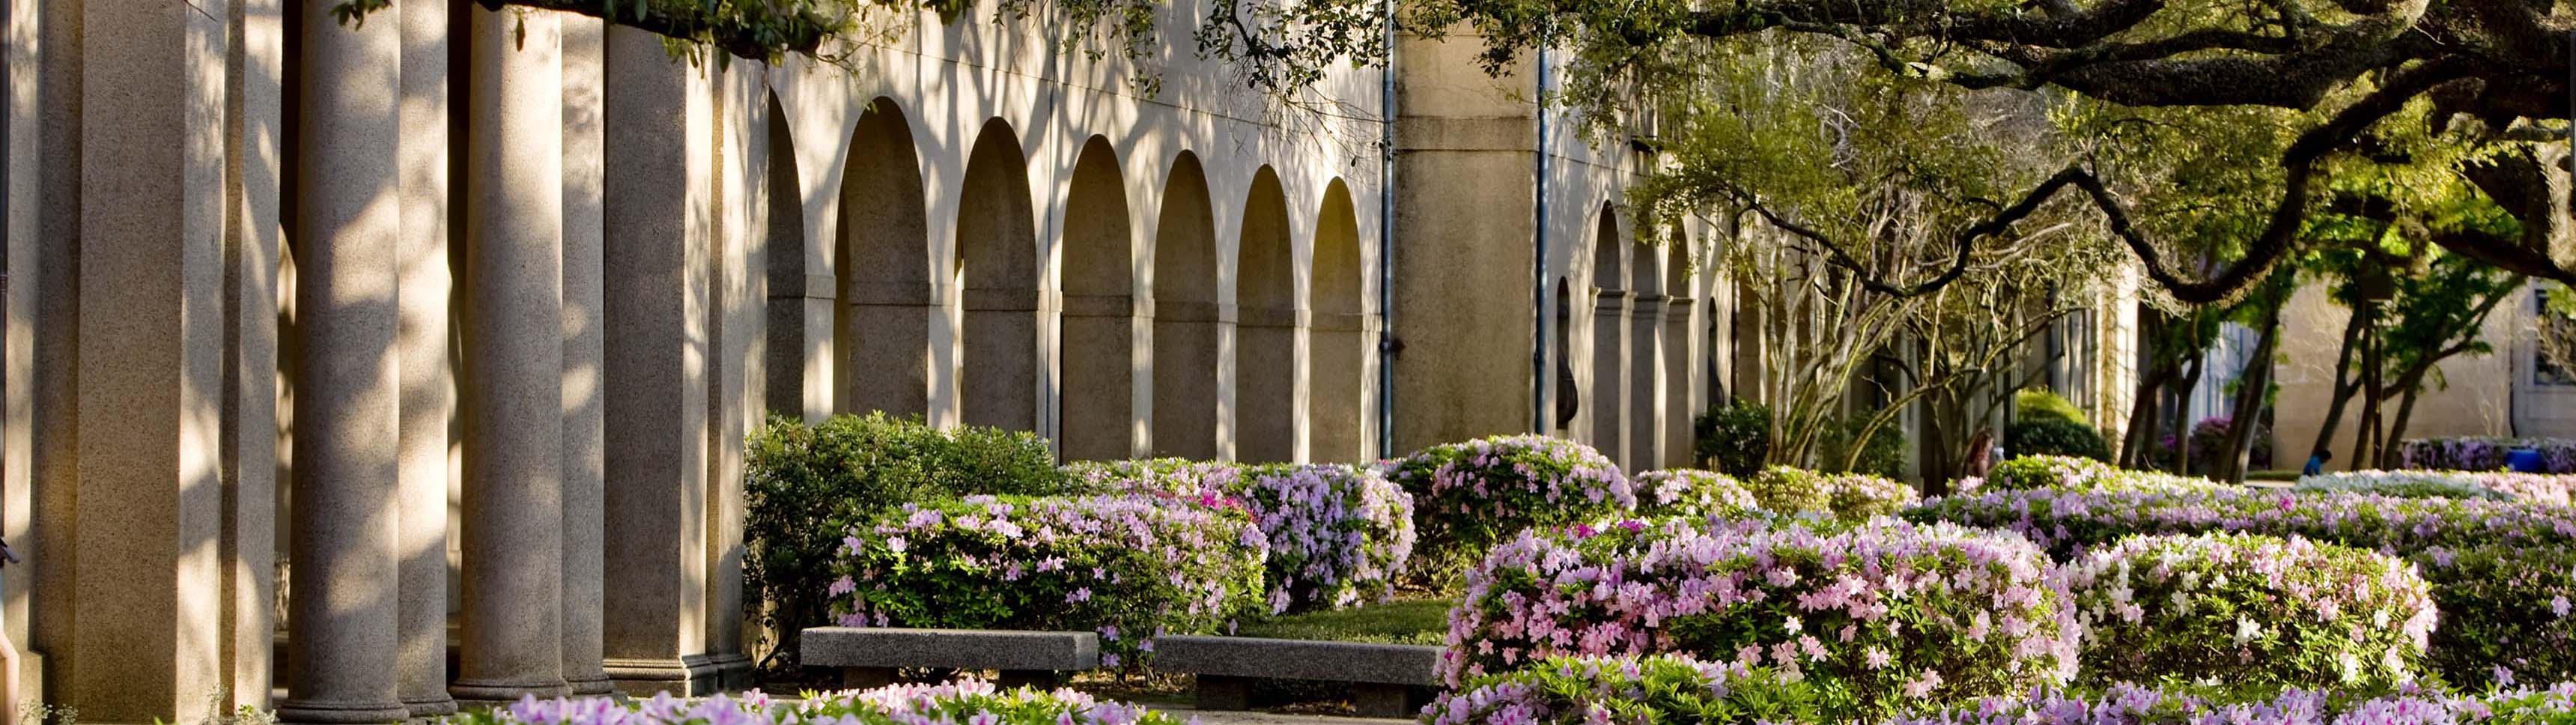 blooming azaleas in the quad